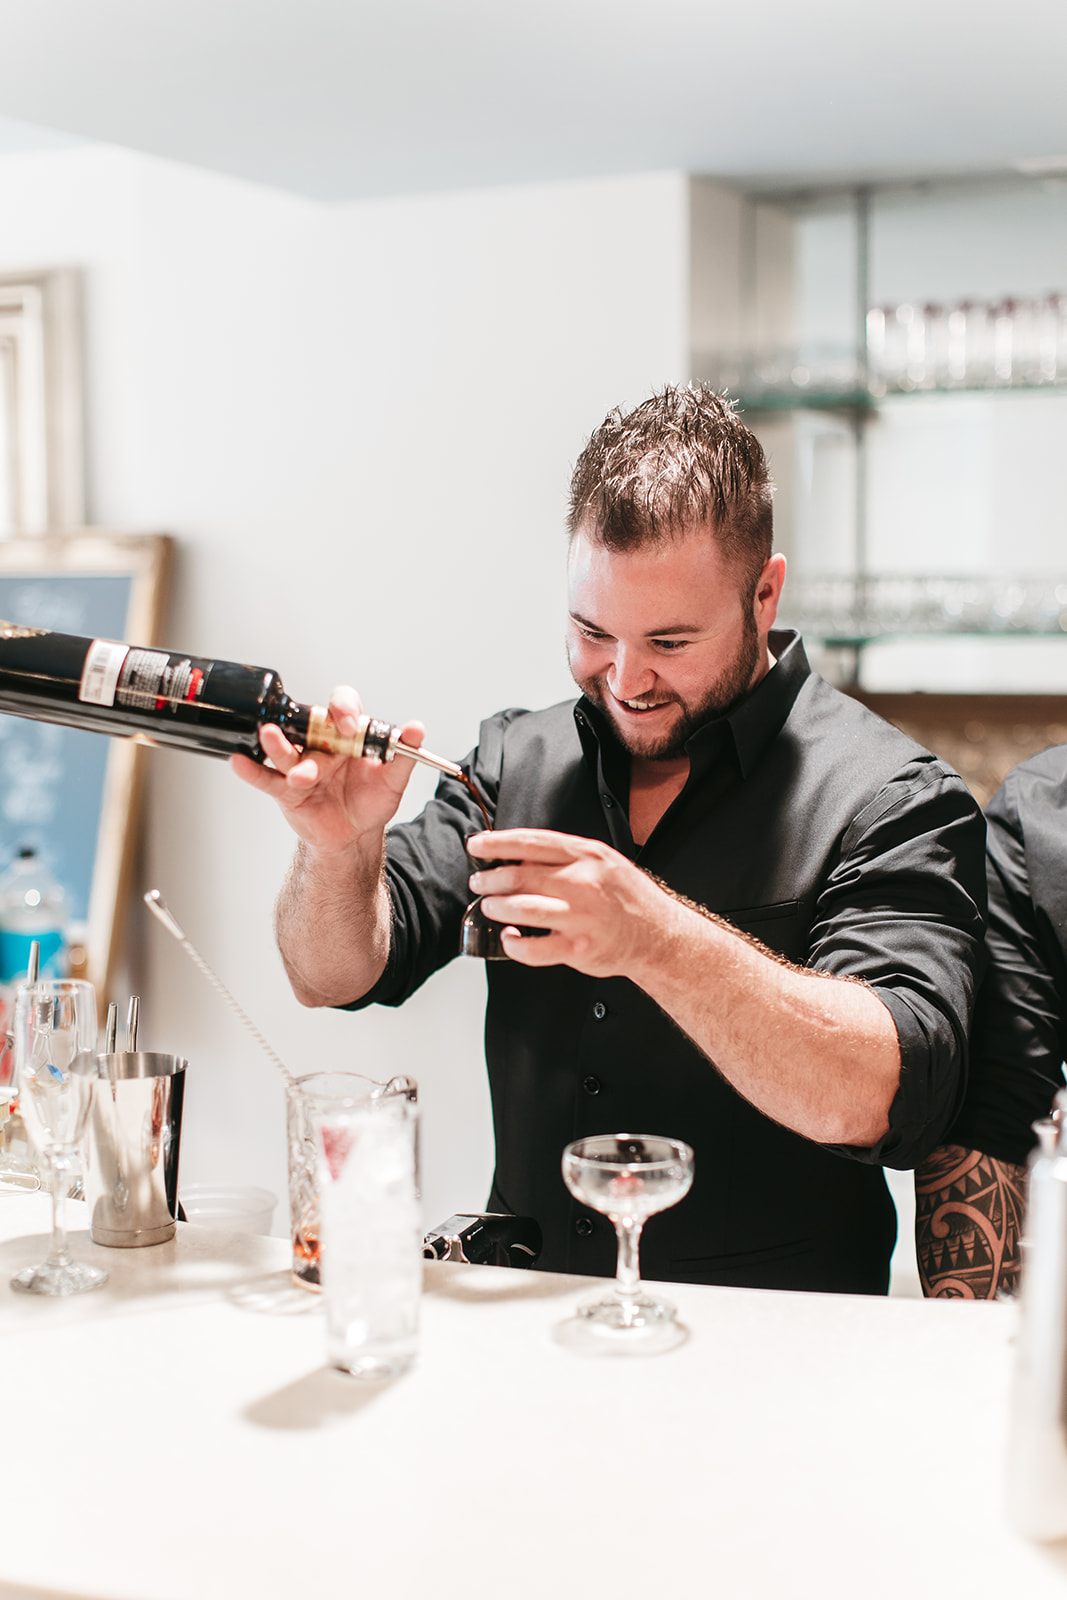 Brendan is pouring cocktails.